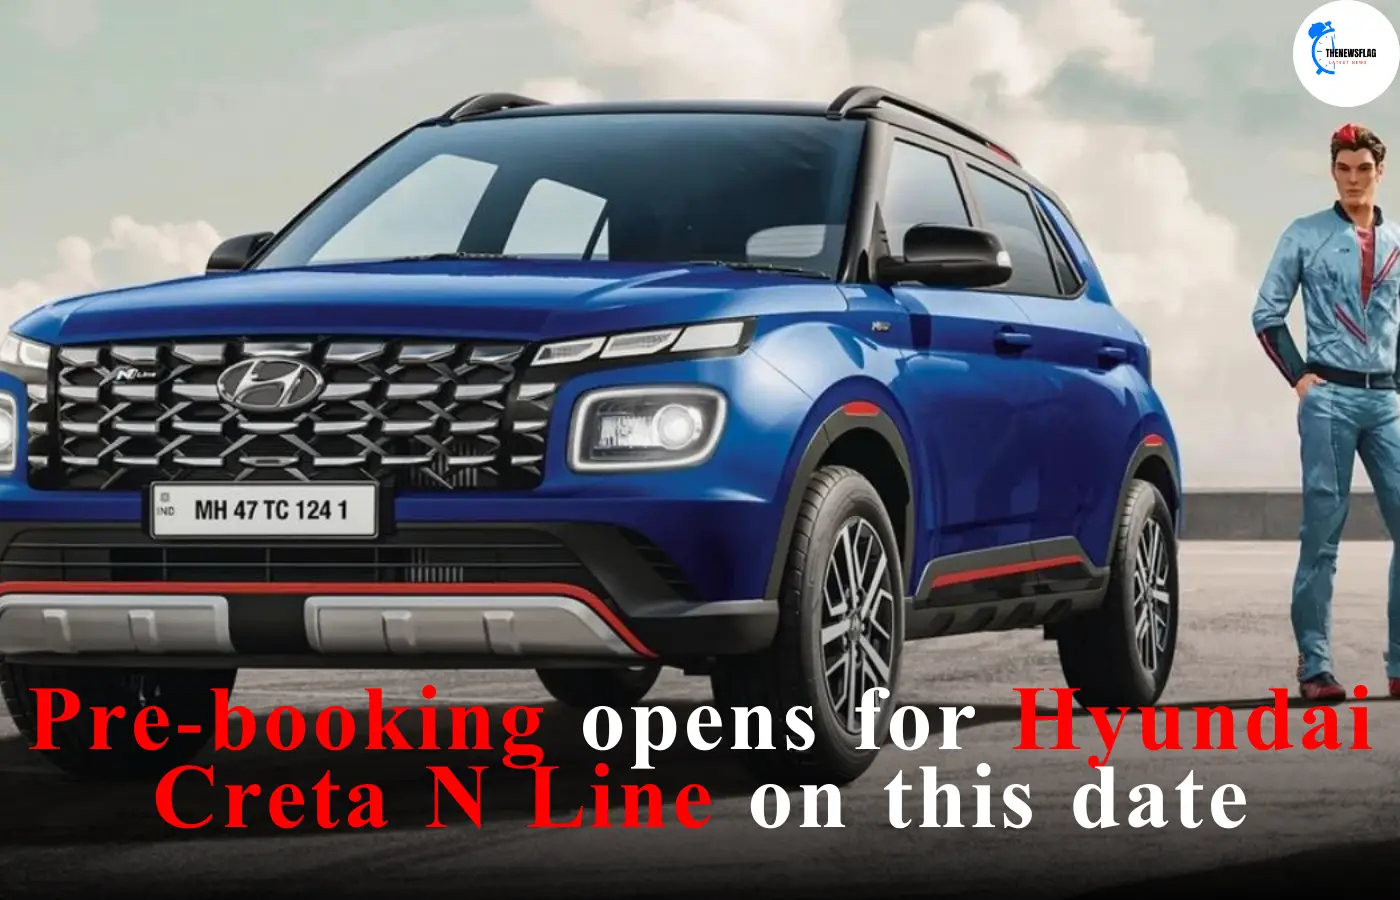 Pre-booking opens for Hyundai Creta N Line on this date